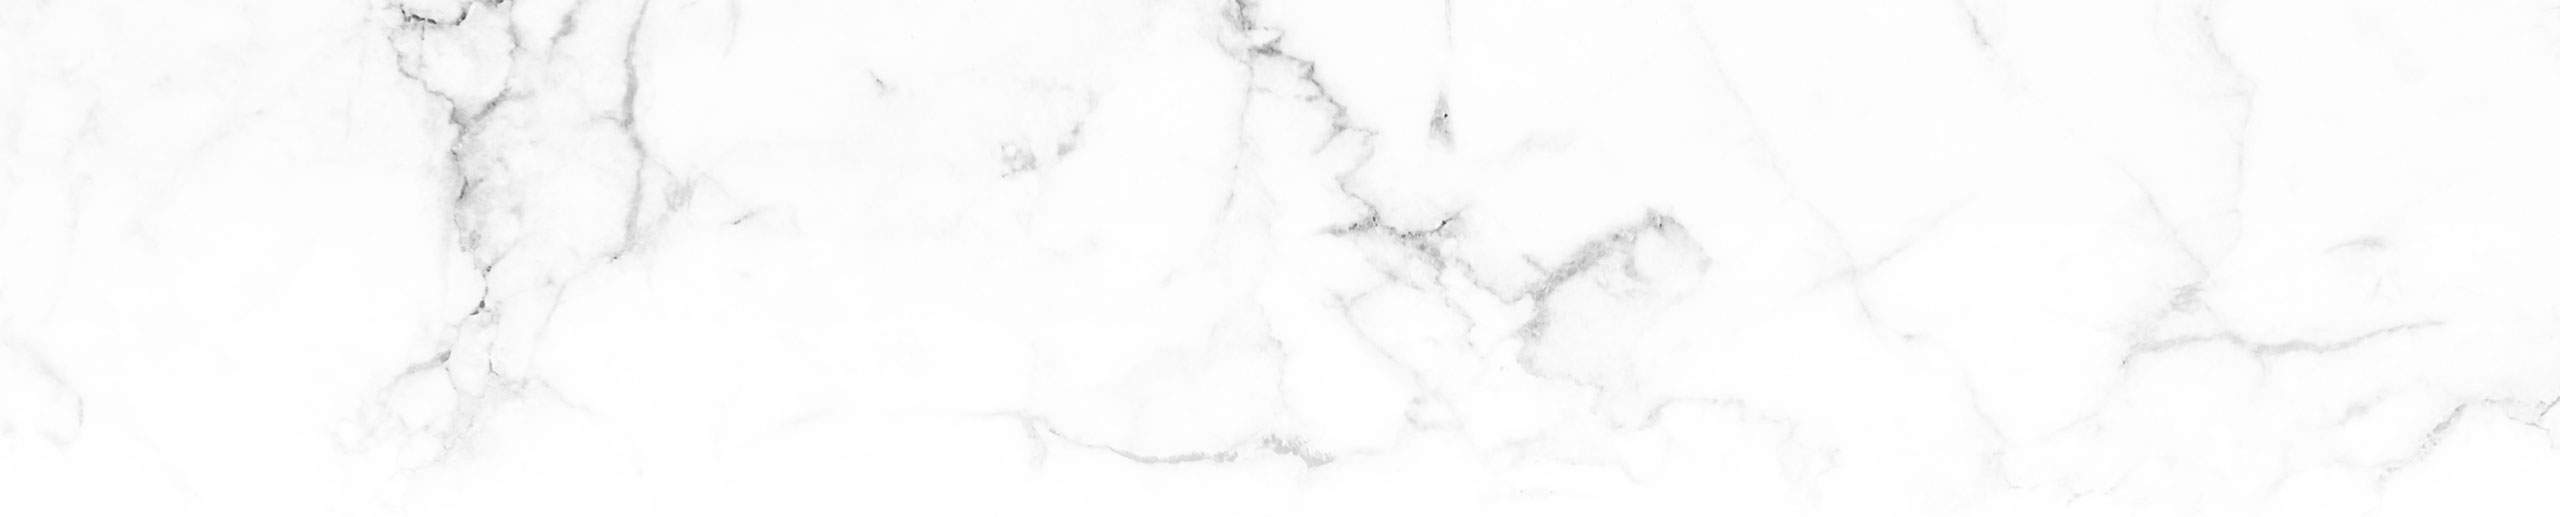 A white marbled surface